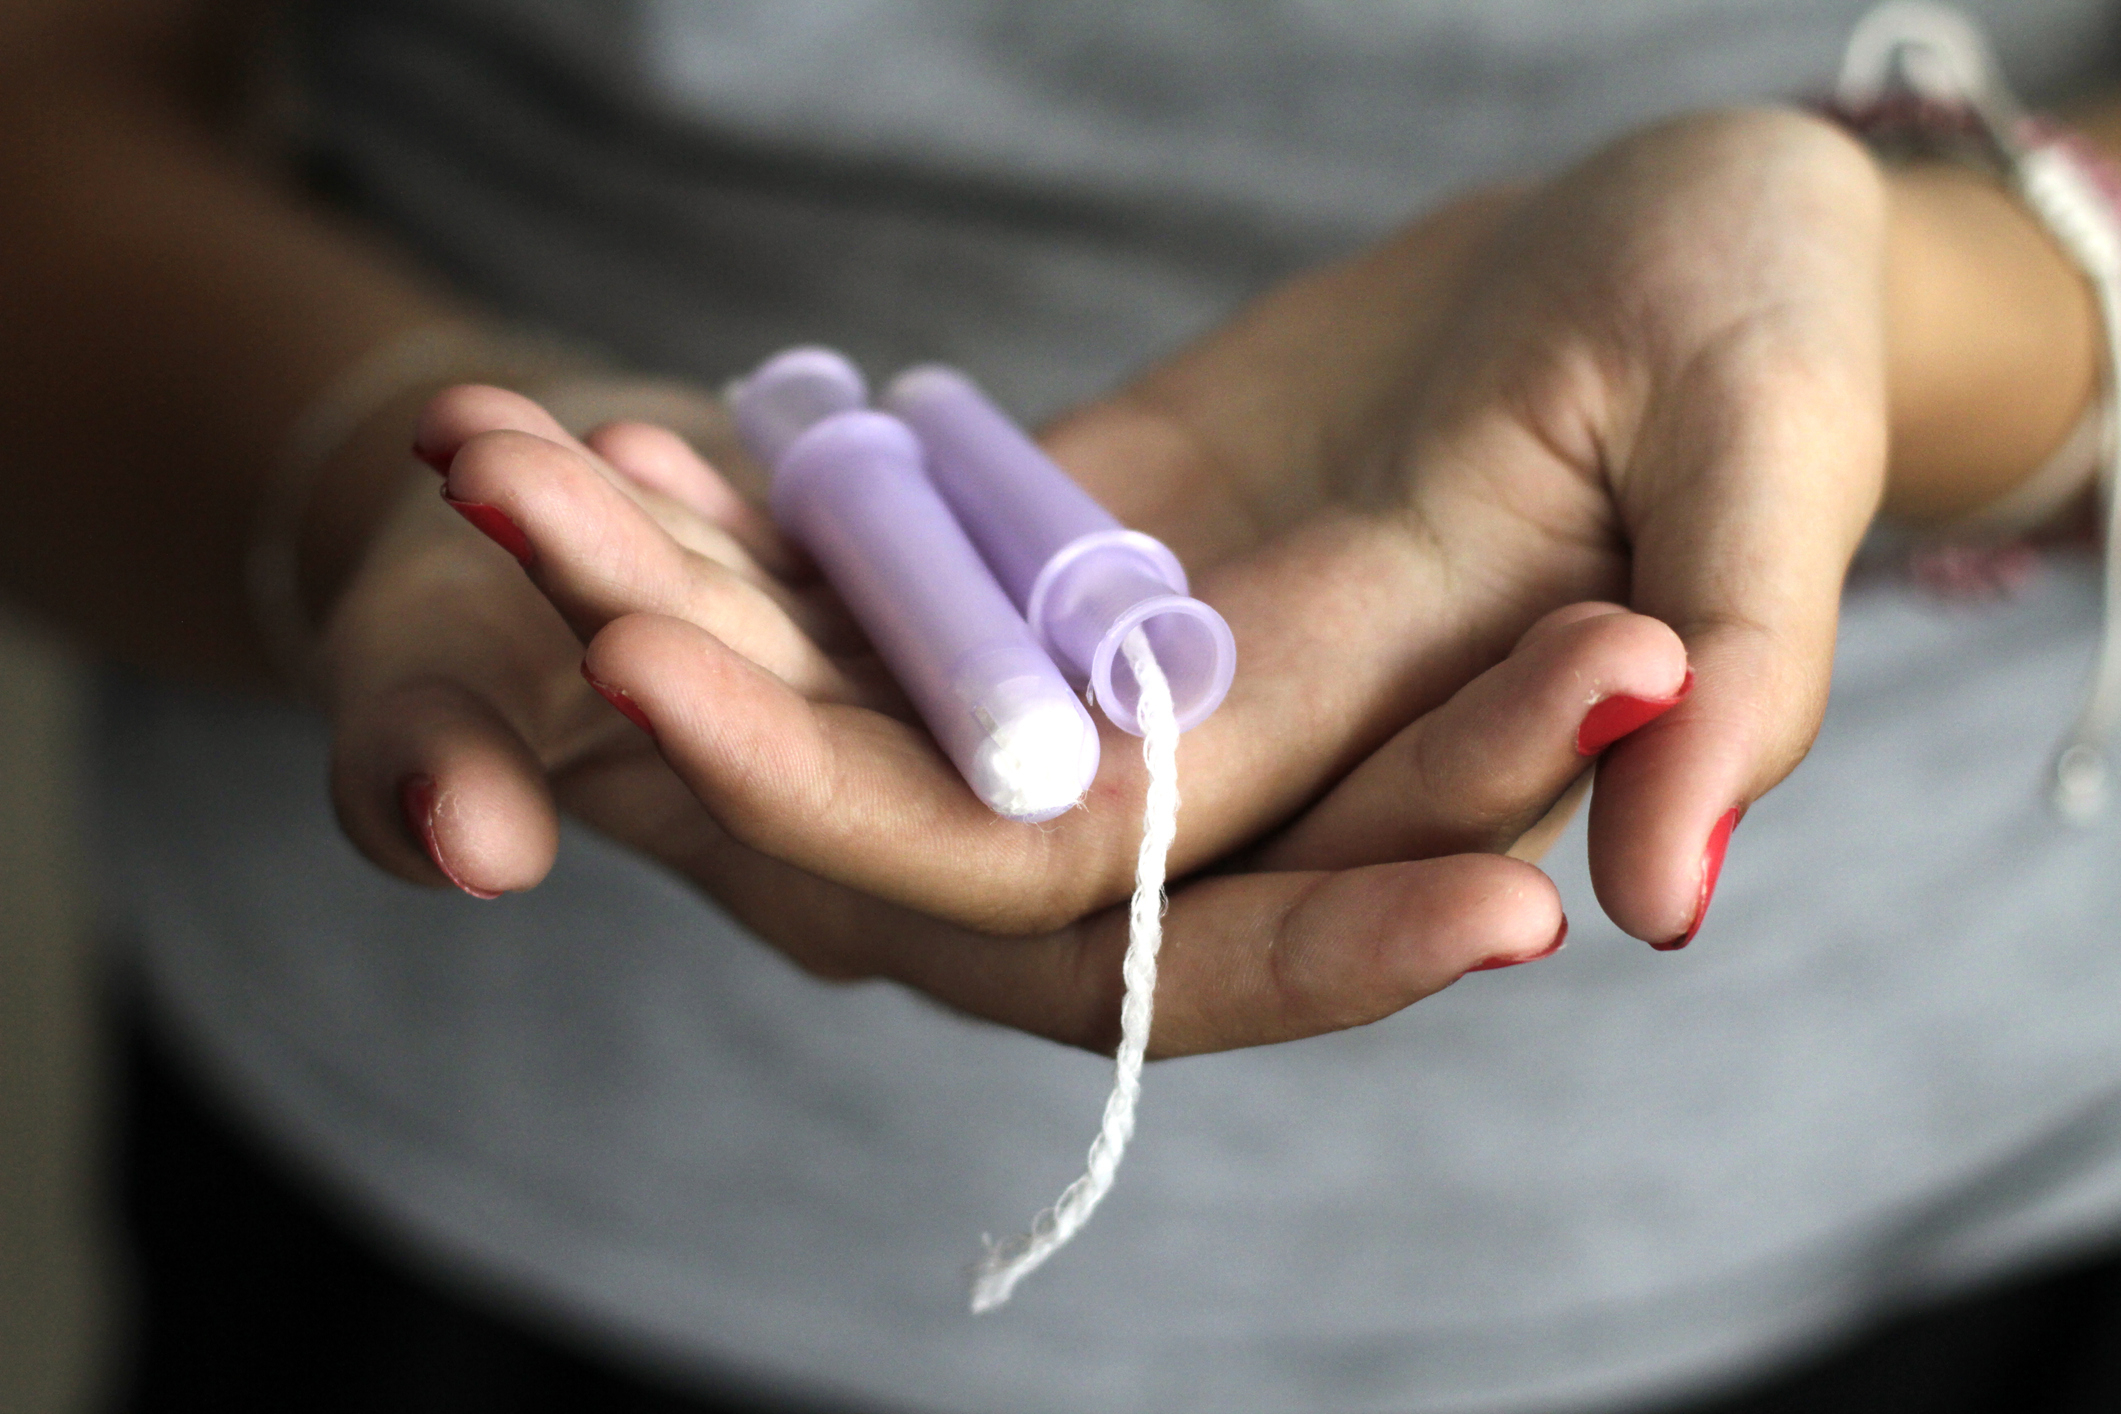 Person holding several tampons in their hand